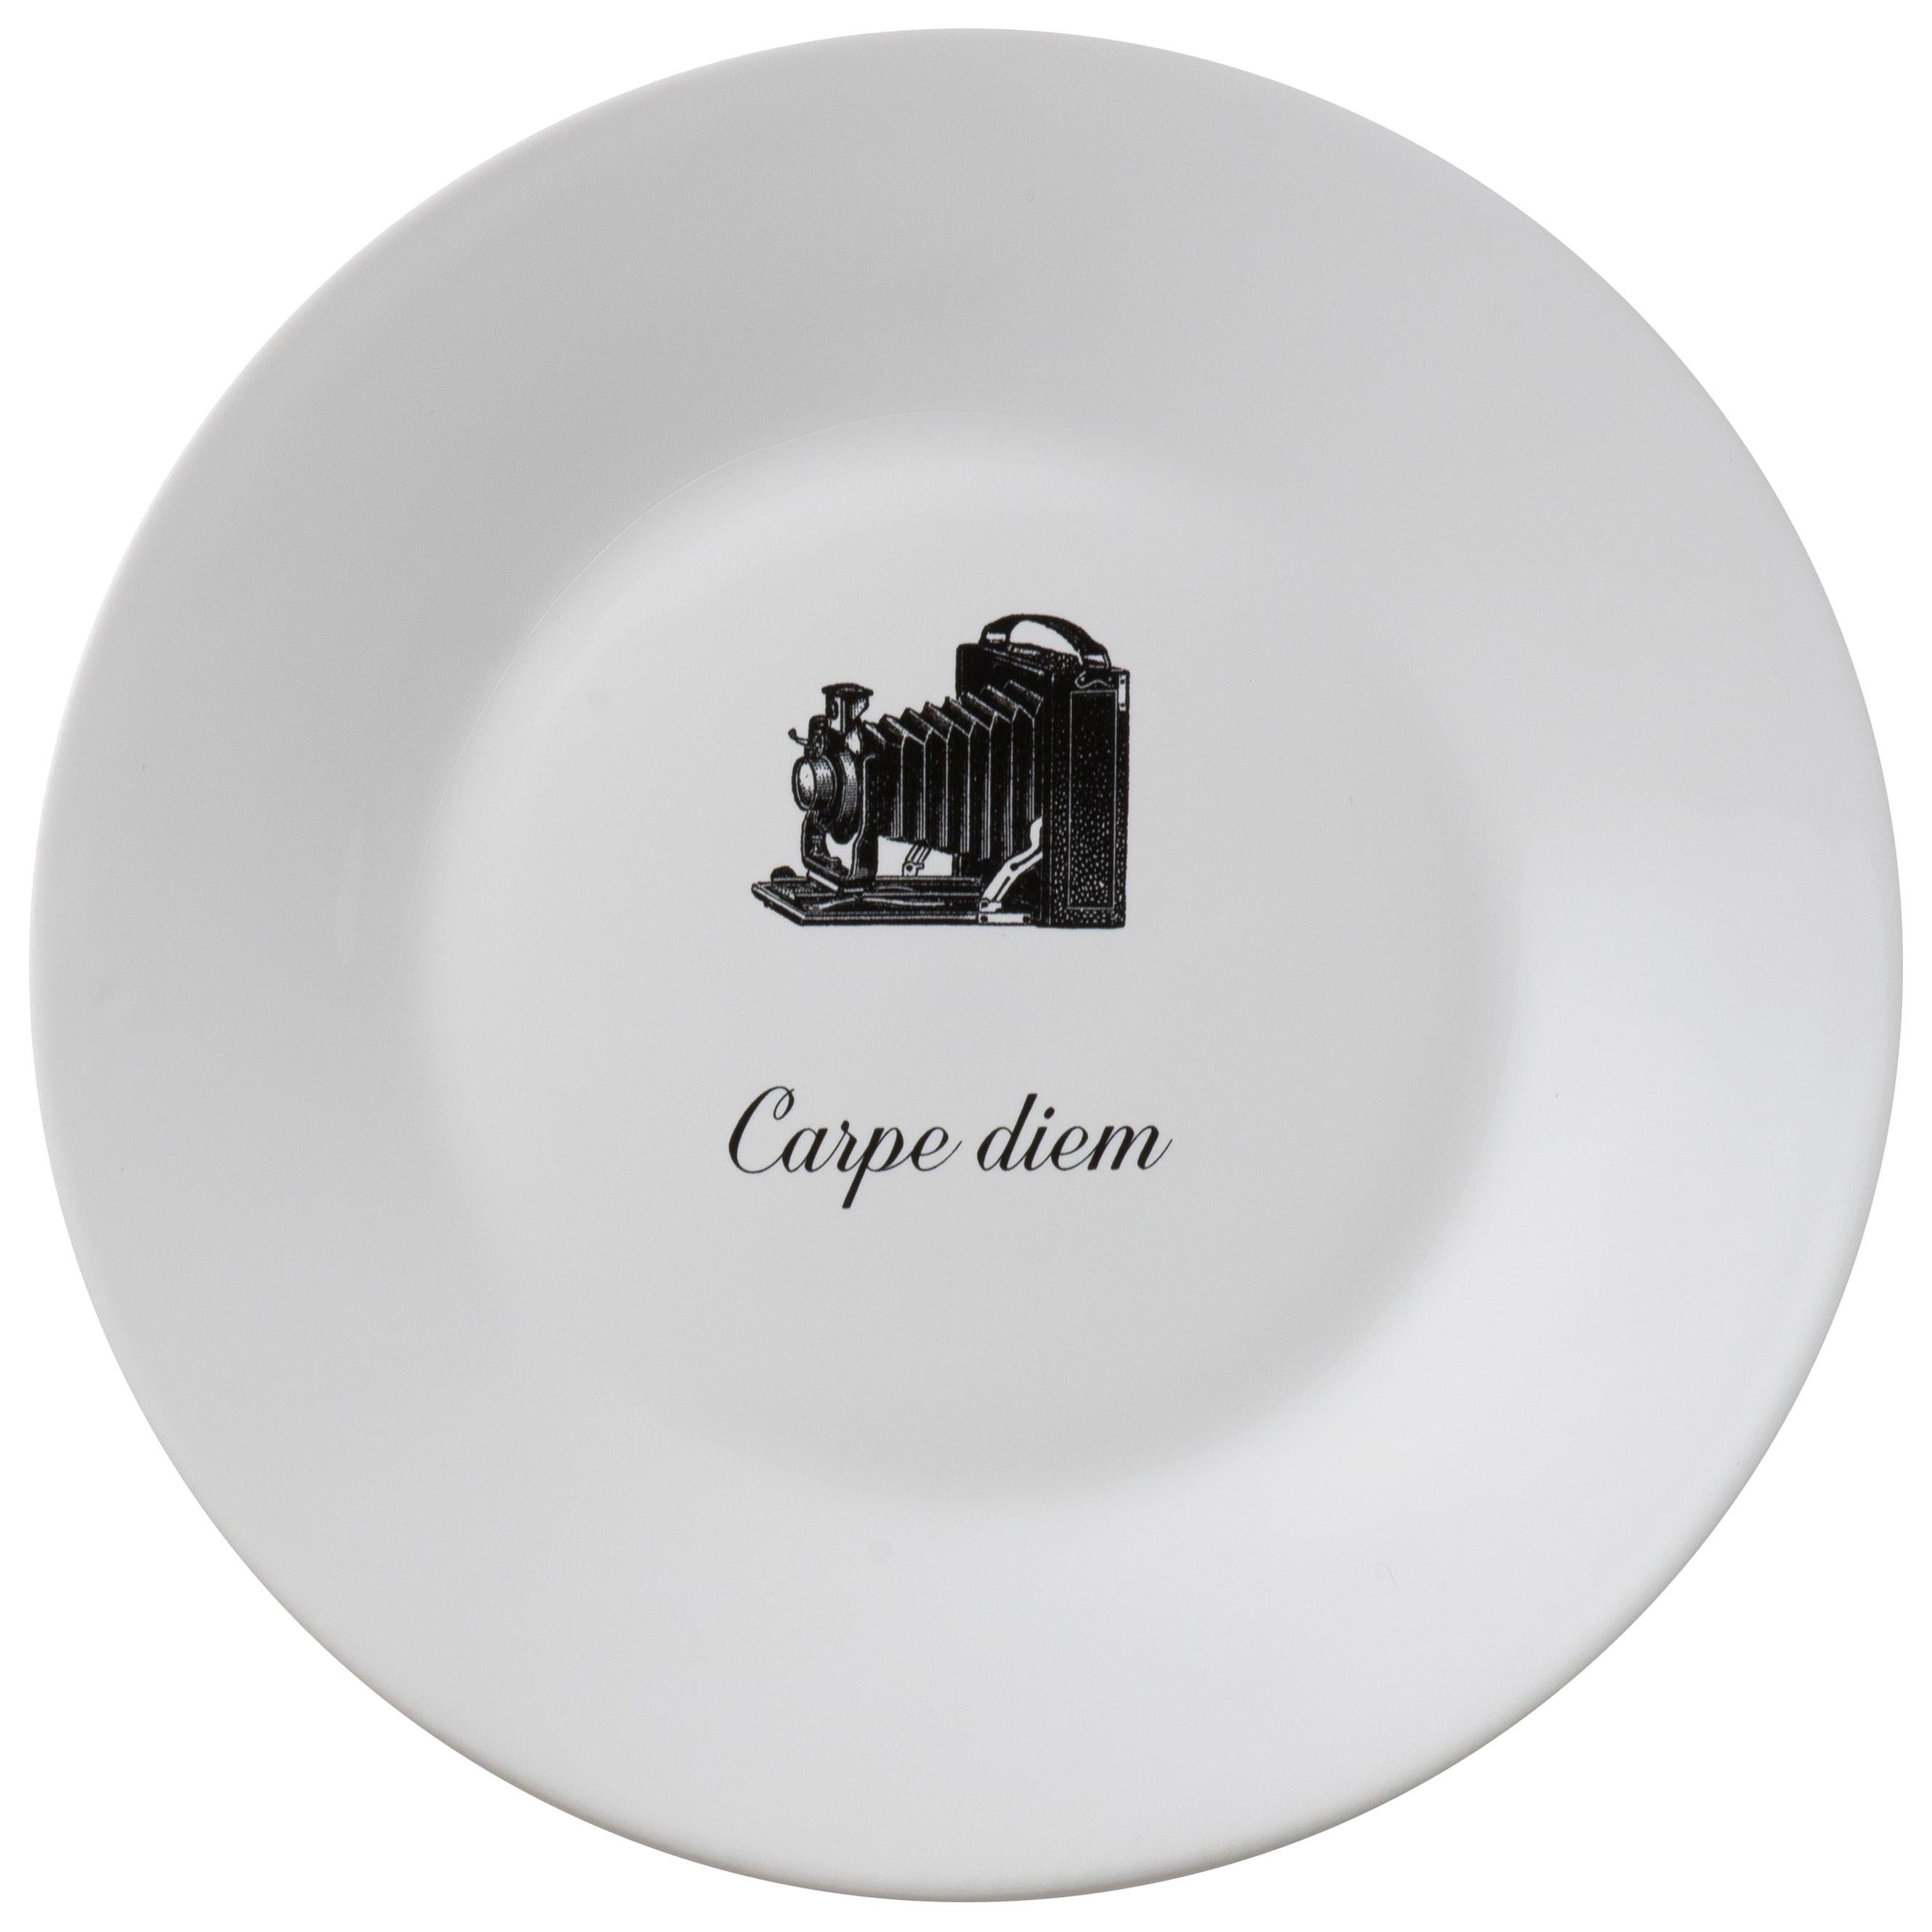 "Ipse Dixit", Crafted in Italy Set of Dessert Plates with Famous Latin Mottos For Sale